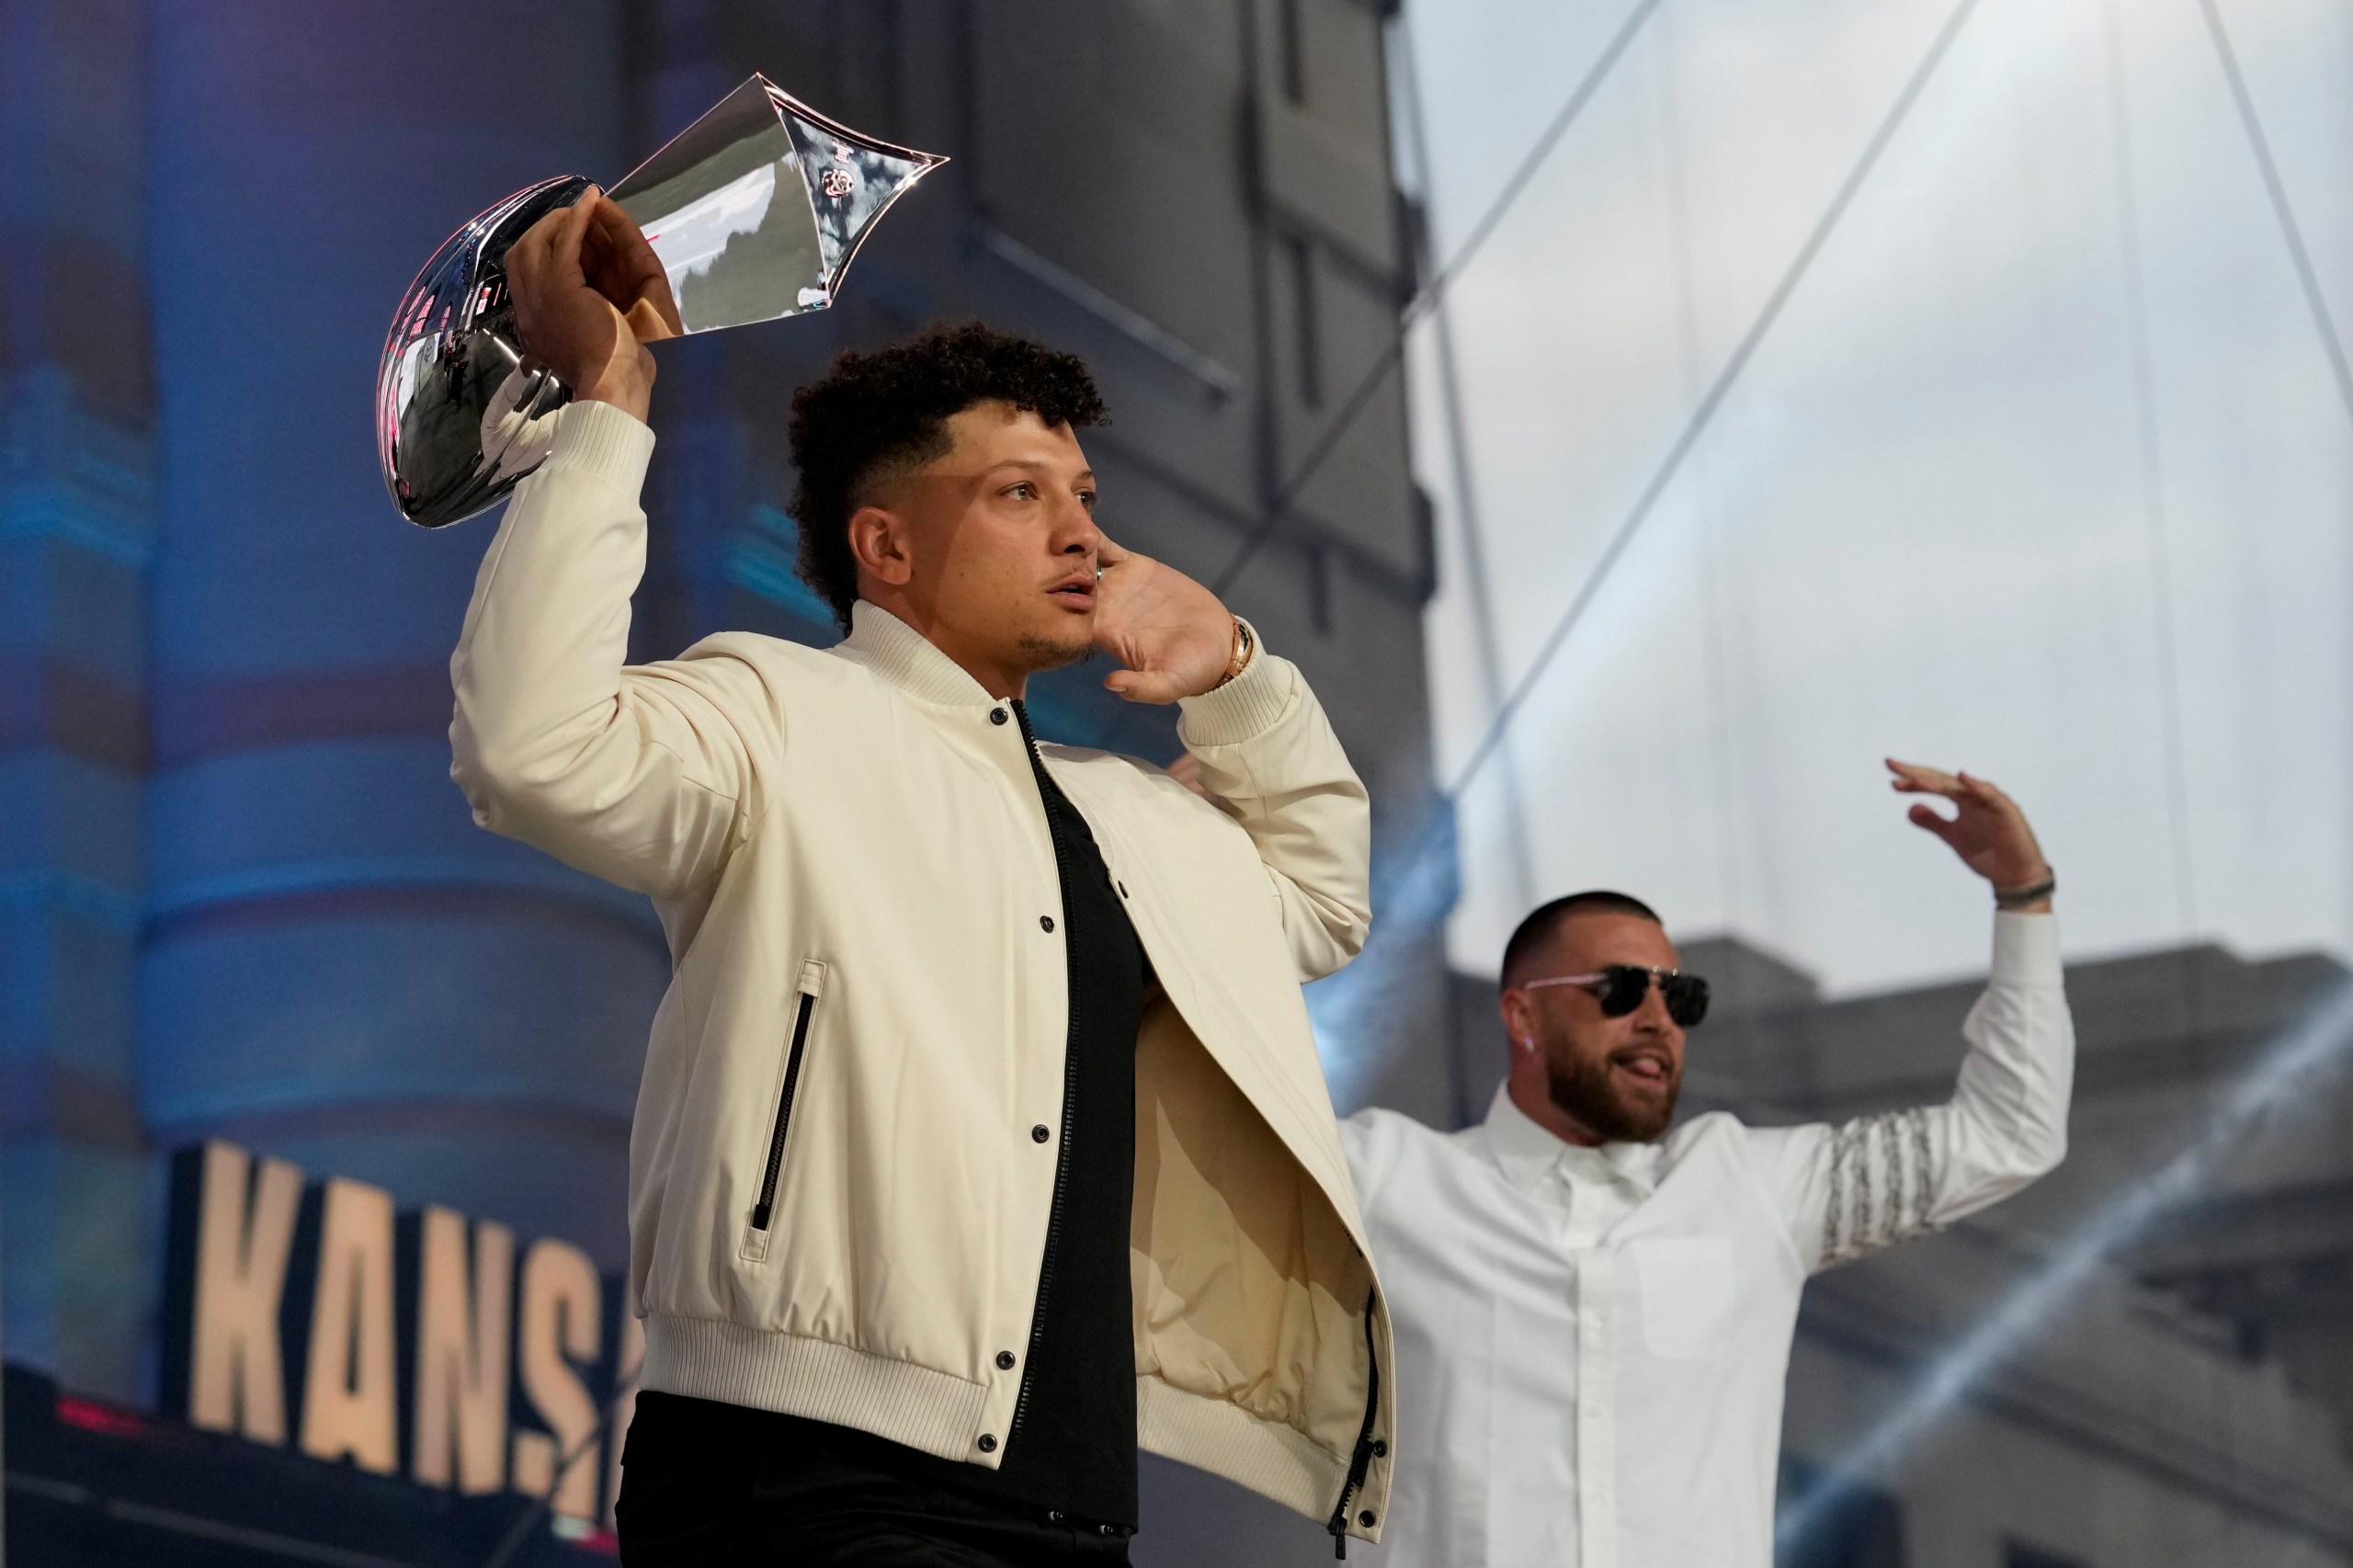 Kentucky Derby: Patrick Mahomes to give 'Riders Up' call